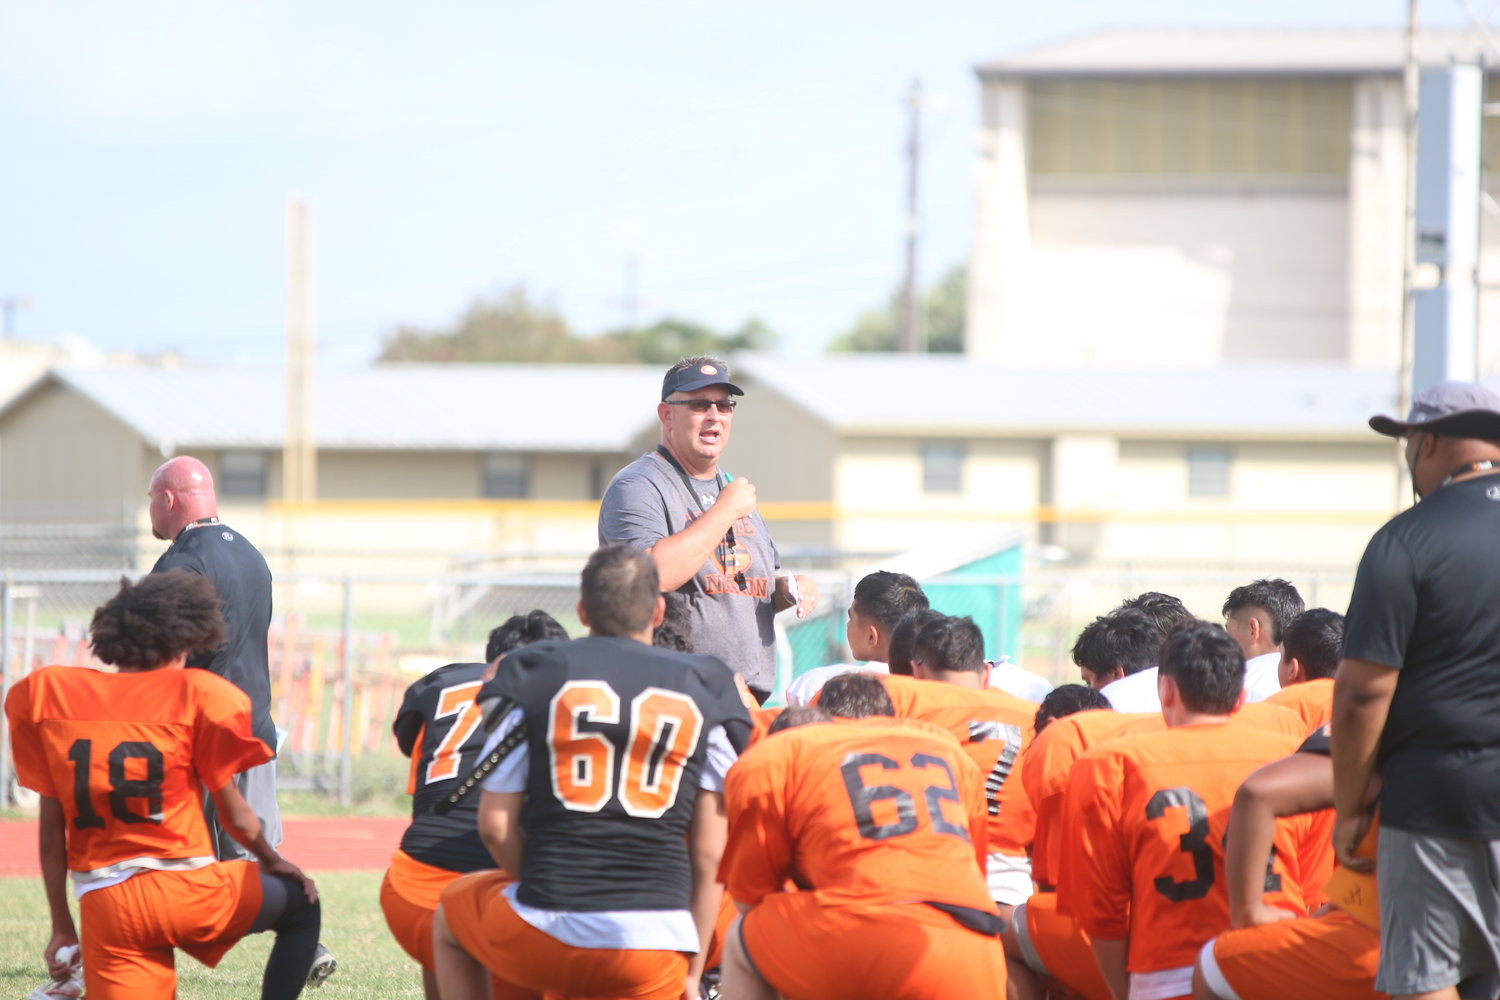 The Gonzales Apaches held their annual scrimmage at their practice field last Saturday, with sub-varsity players competing against each other and later varsity players competing against each other.